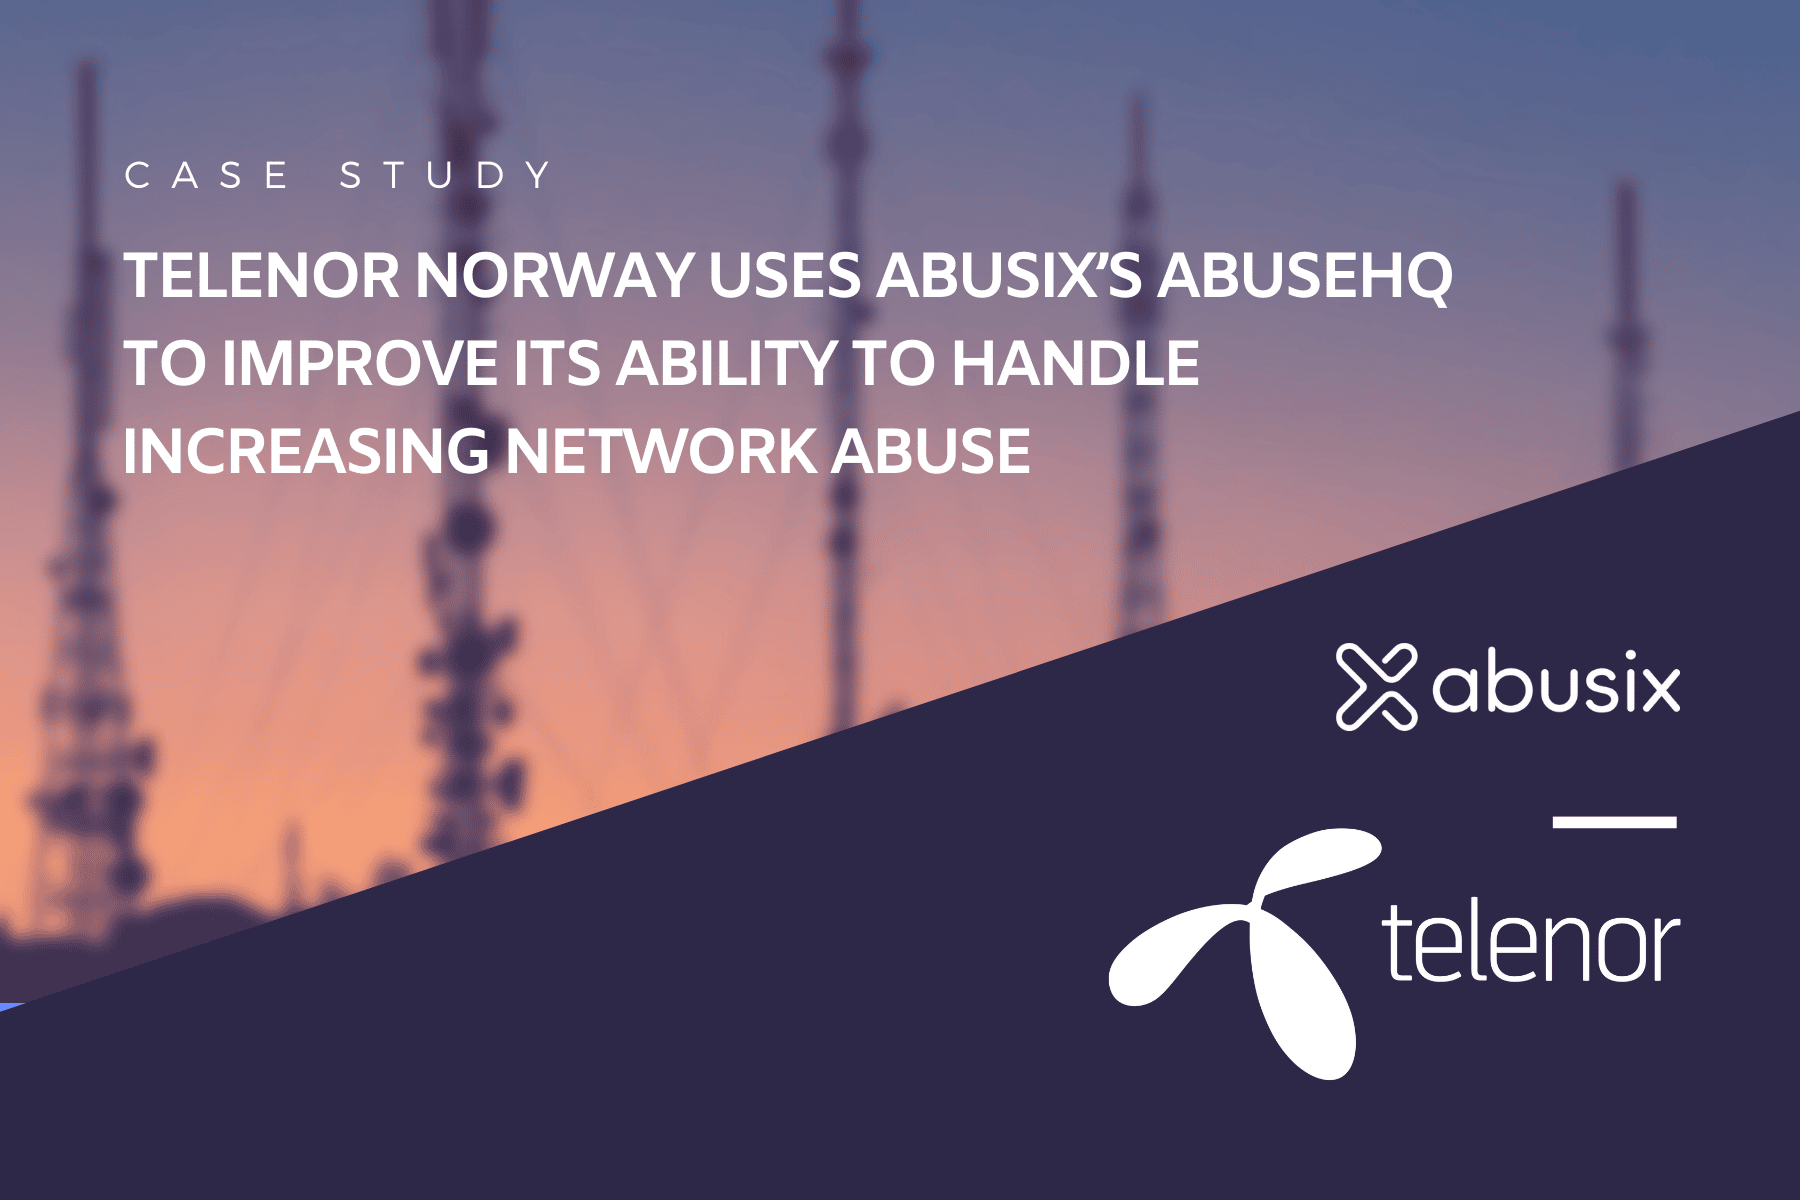 Blog Post graphic for Case Study "Telenor Norway Uses Abusix’s AbuseHQ to Improve Its Ability to Handle Increasing Network Abuse"